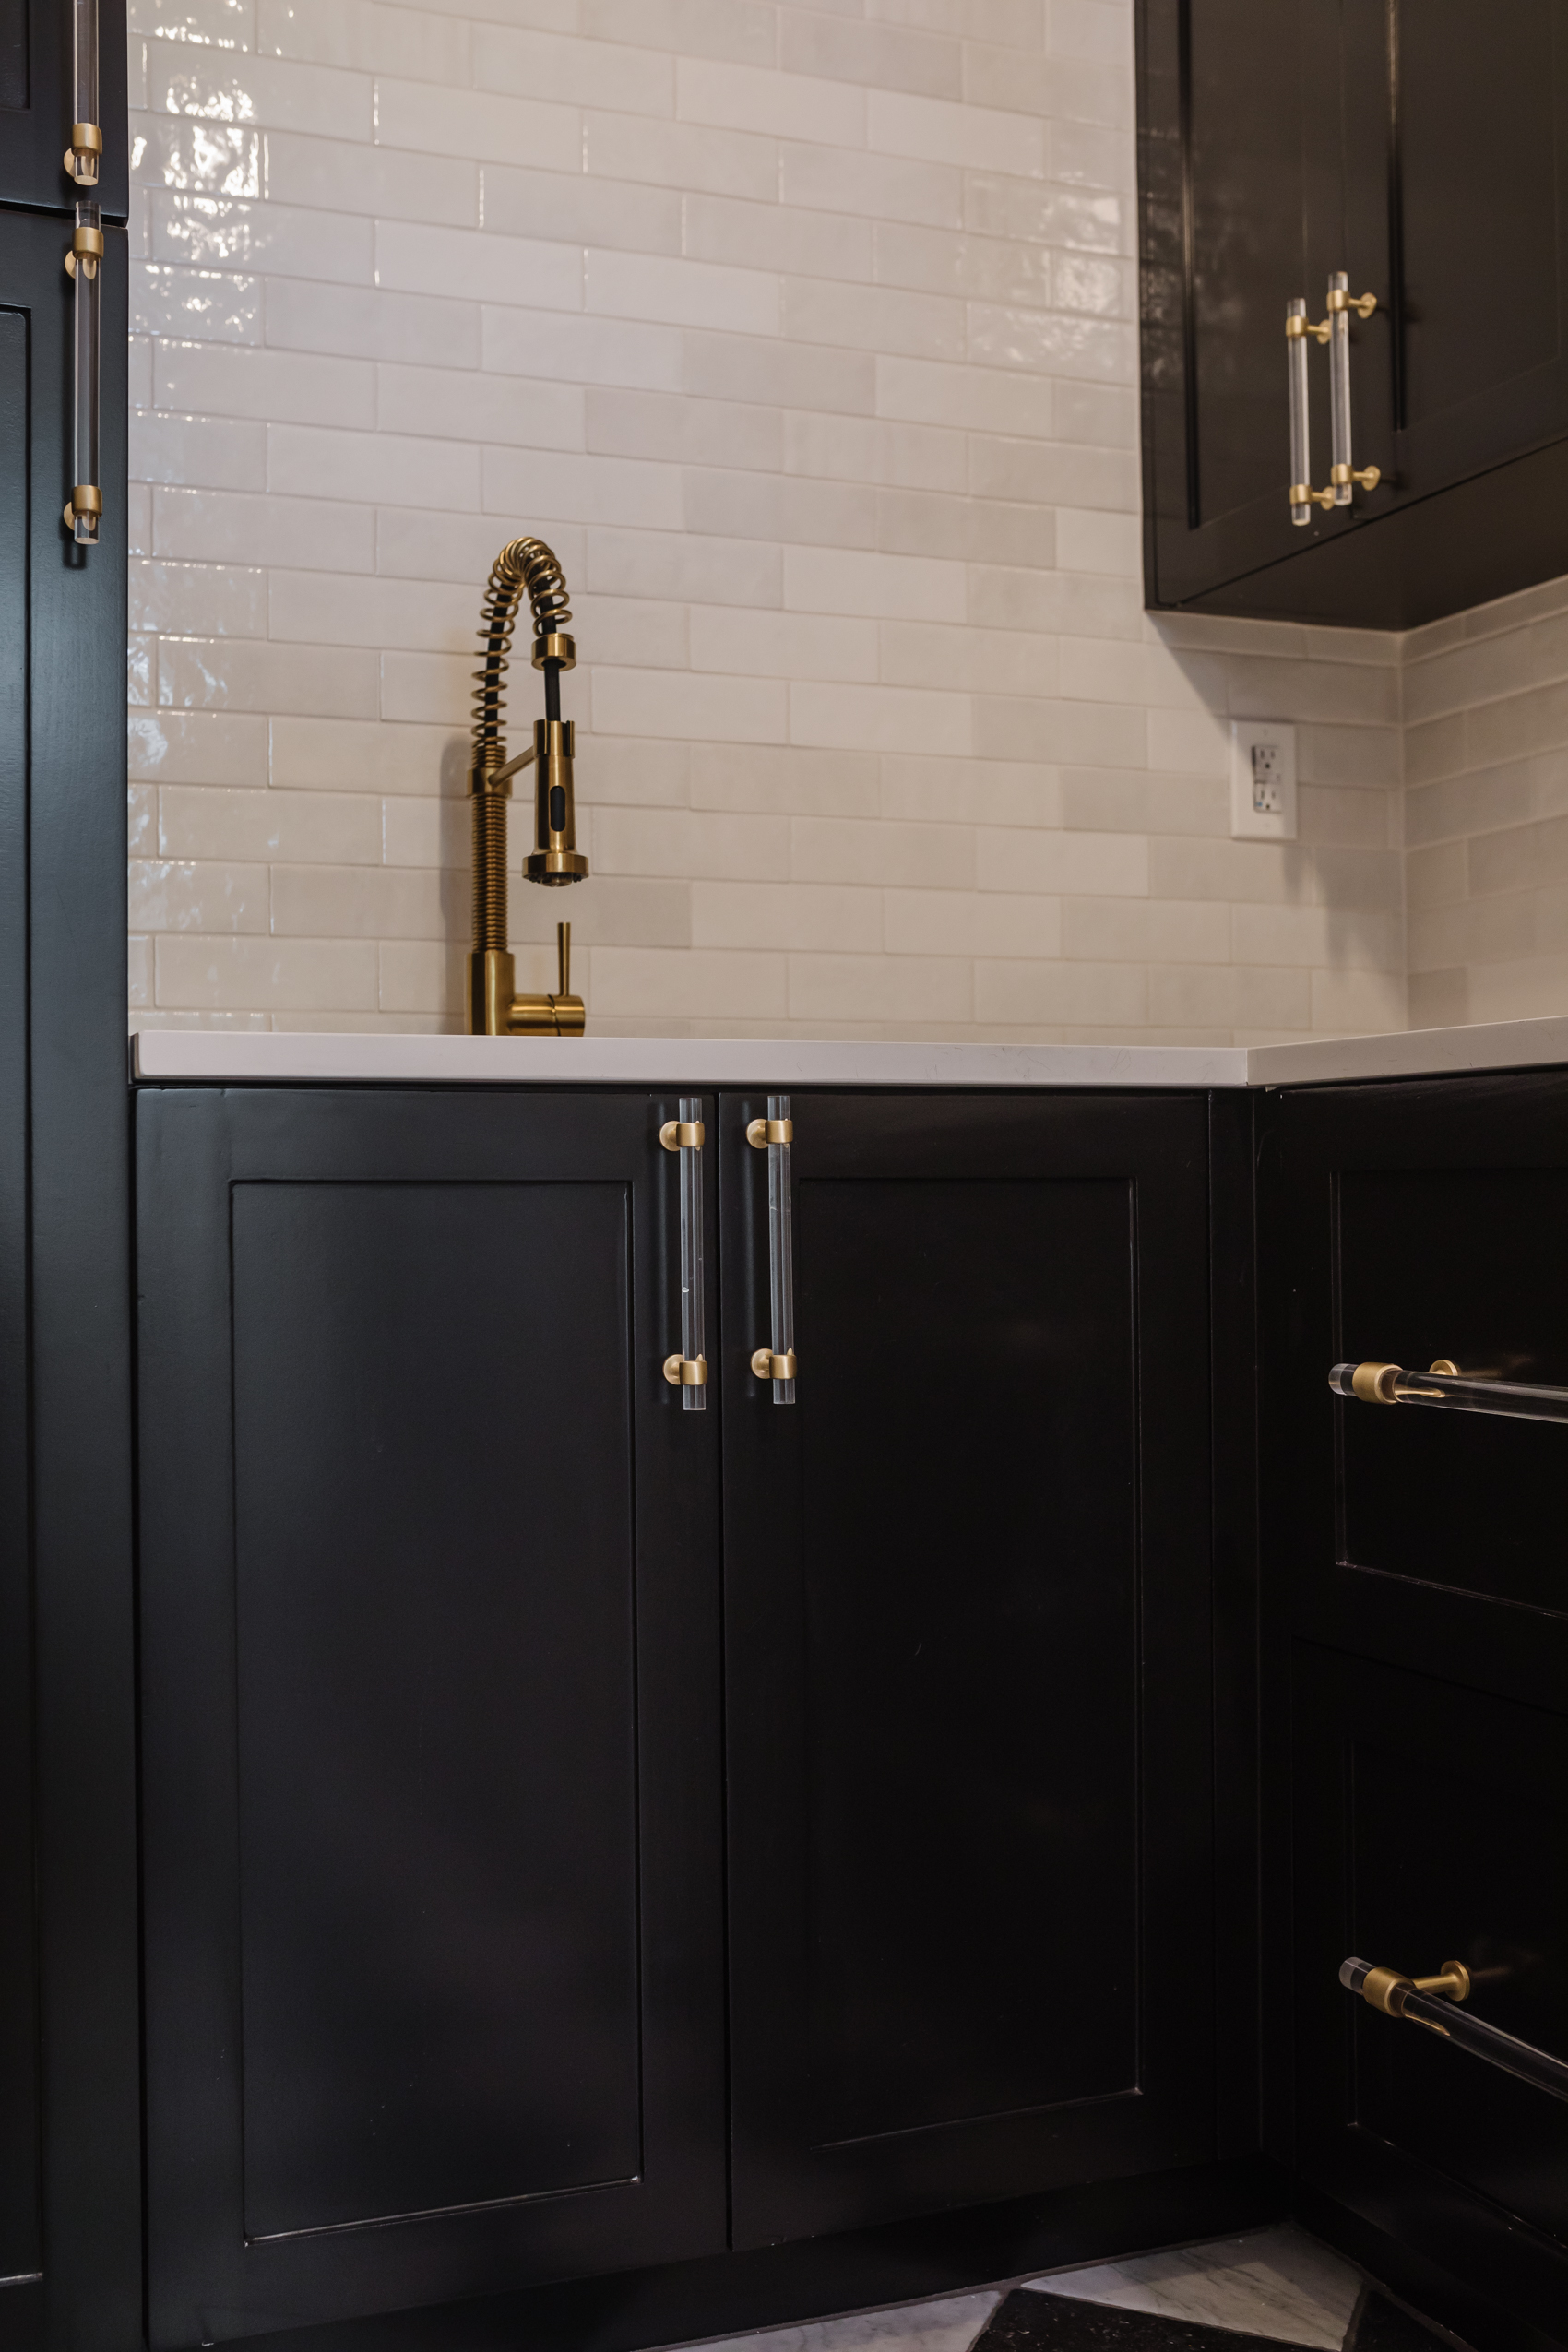 Custom cabinets painted Sherwin Williams Tricorn Black, brass pull down faucet, signature hardware acrylic and brass drawer pulls.